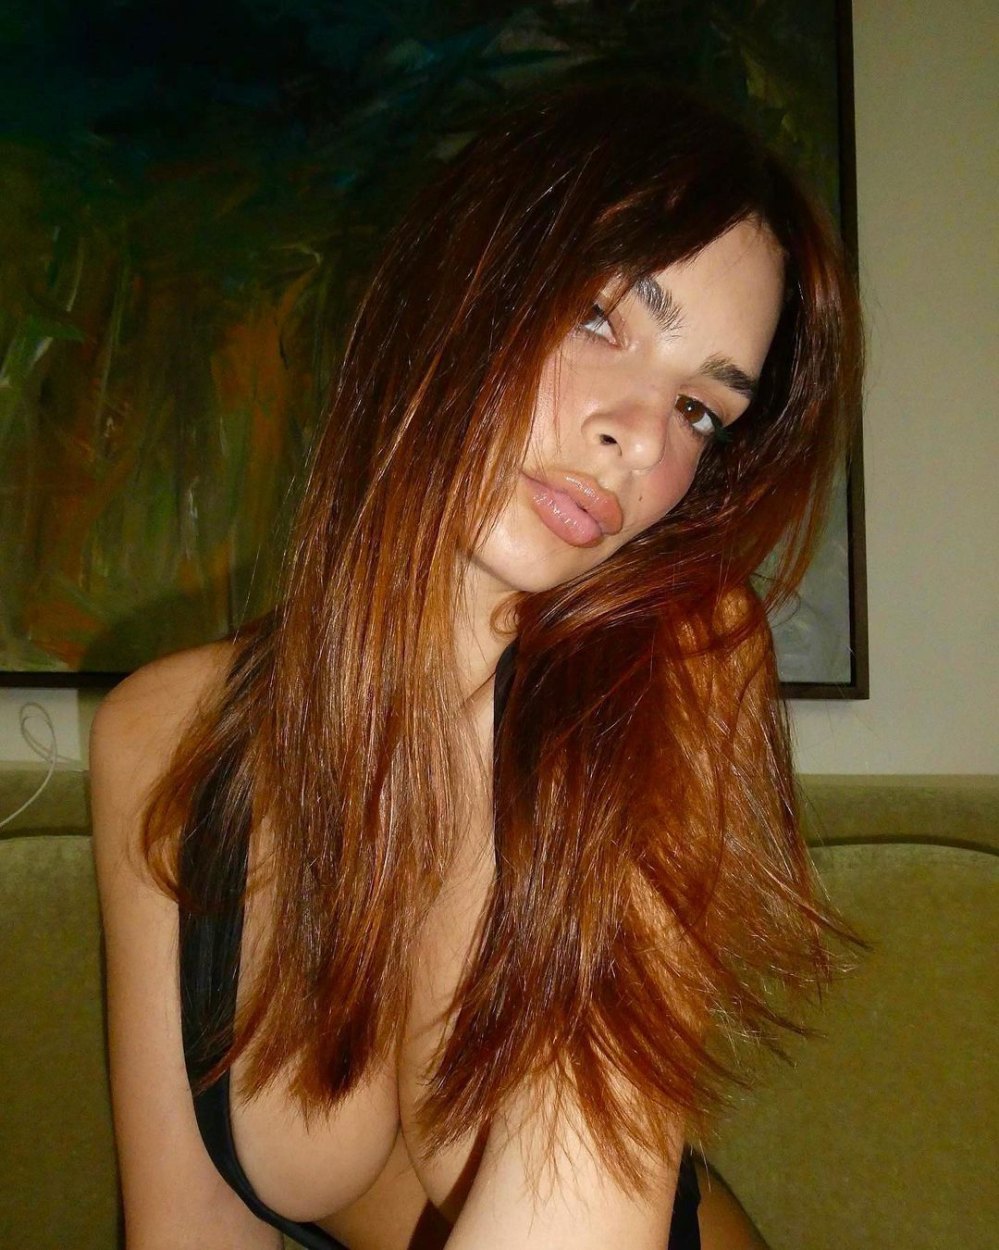 Emily Ratajkowski Looks Foxy With Ginger Hair: ‘Gone Red’